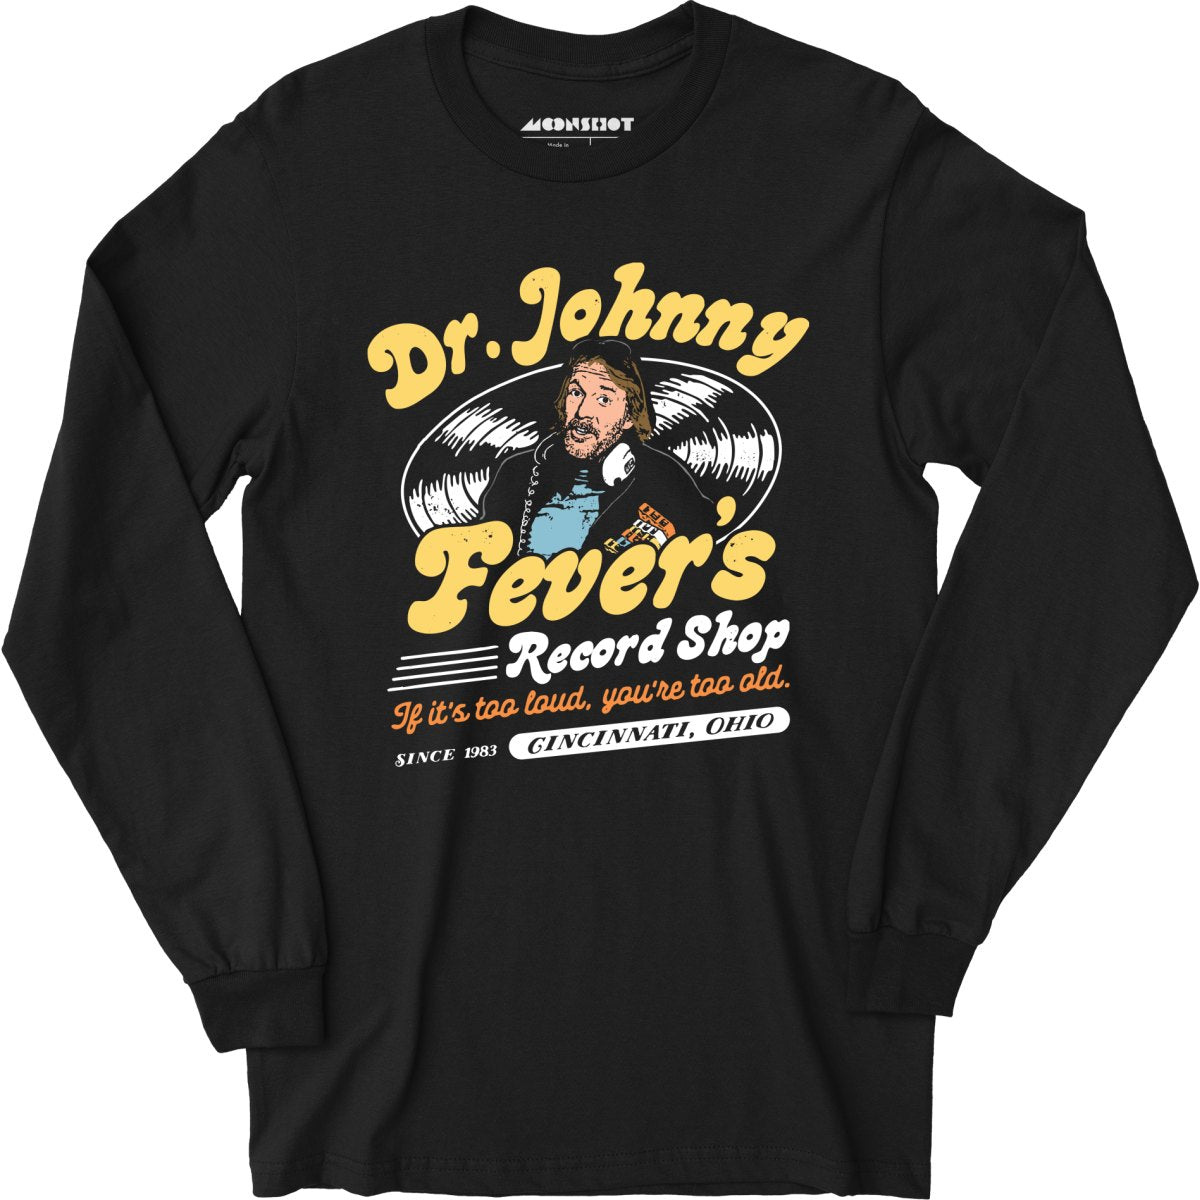 Dr. Johnny Fever's Record Shop - Long Sleeve T-Shirt